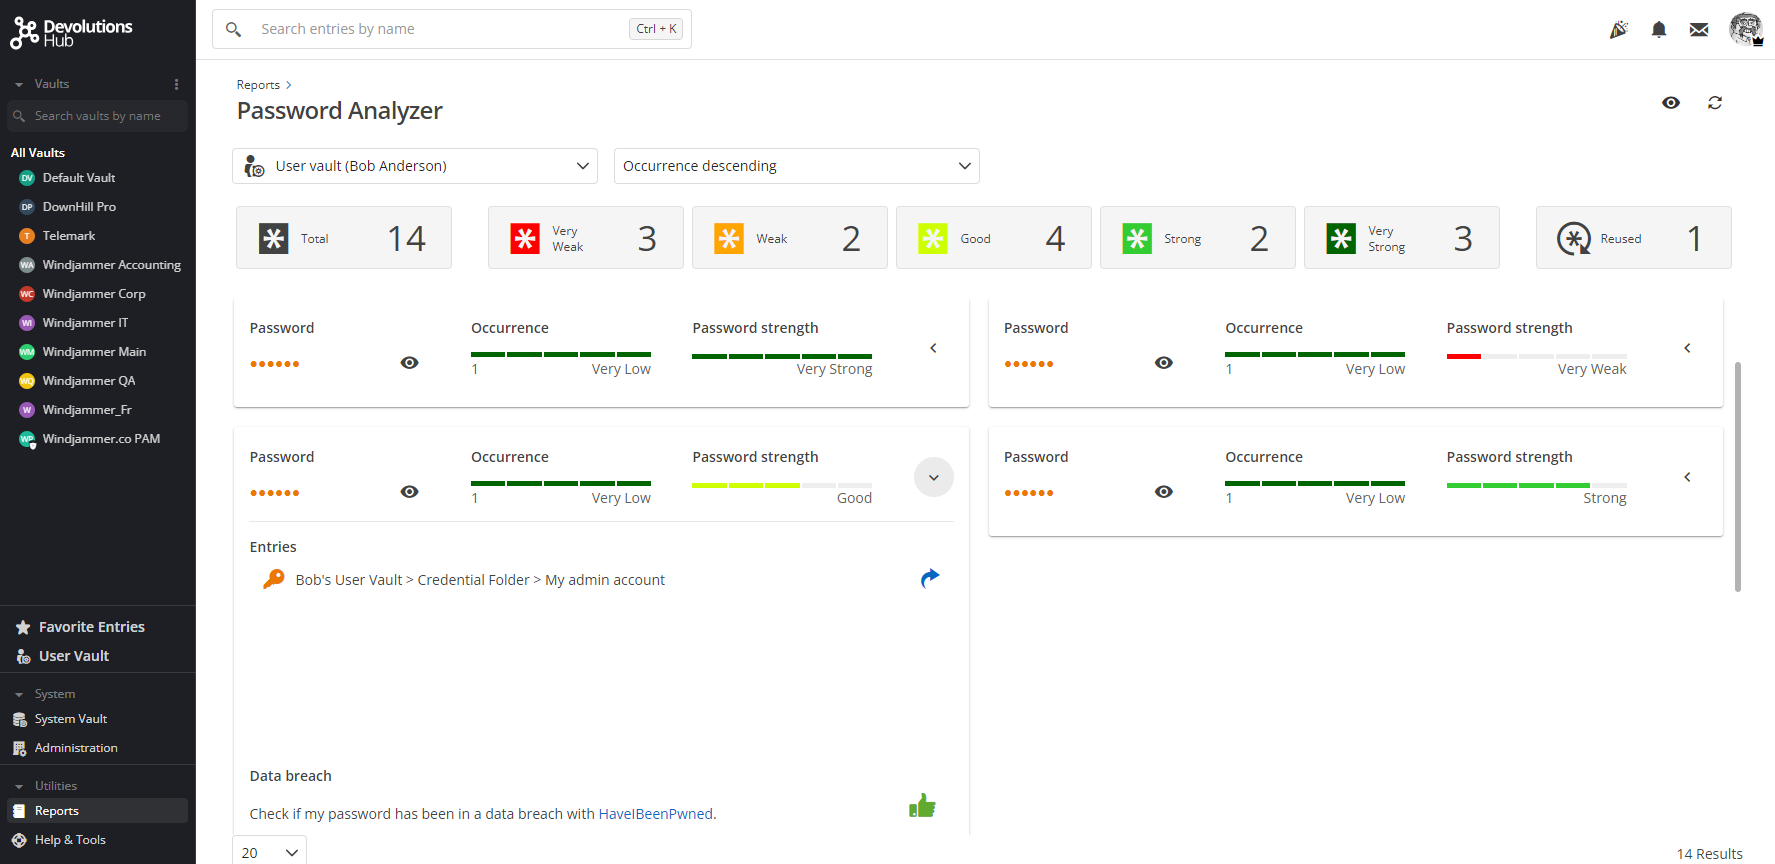 Intuitive Admin View and Tools